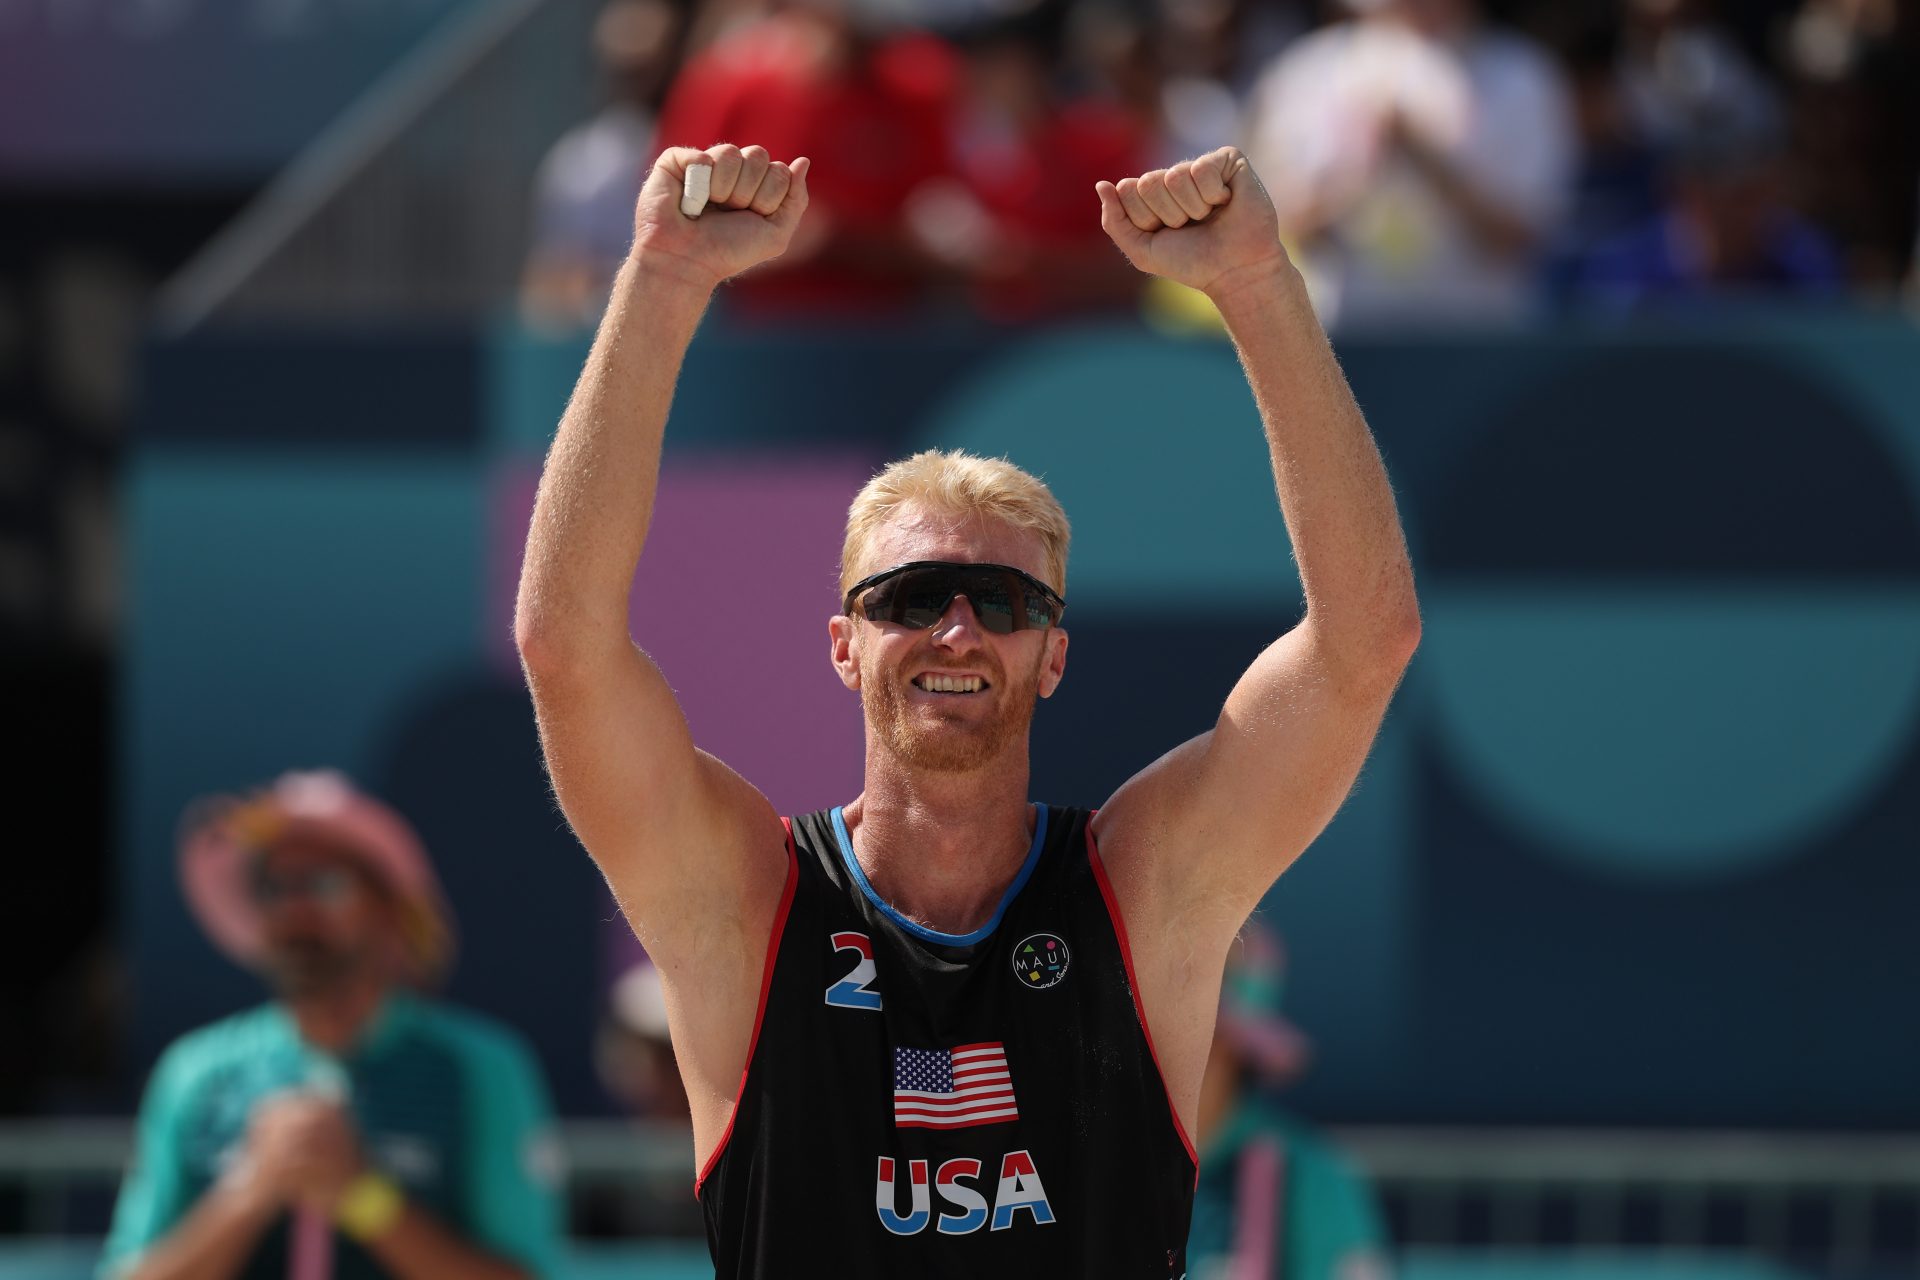 Former NBA player turned USA volleyball star Chase Budinger relishes Olympic spotlight